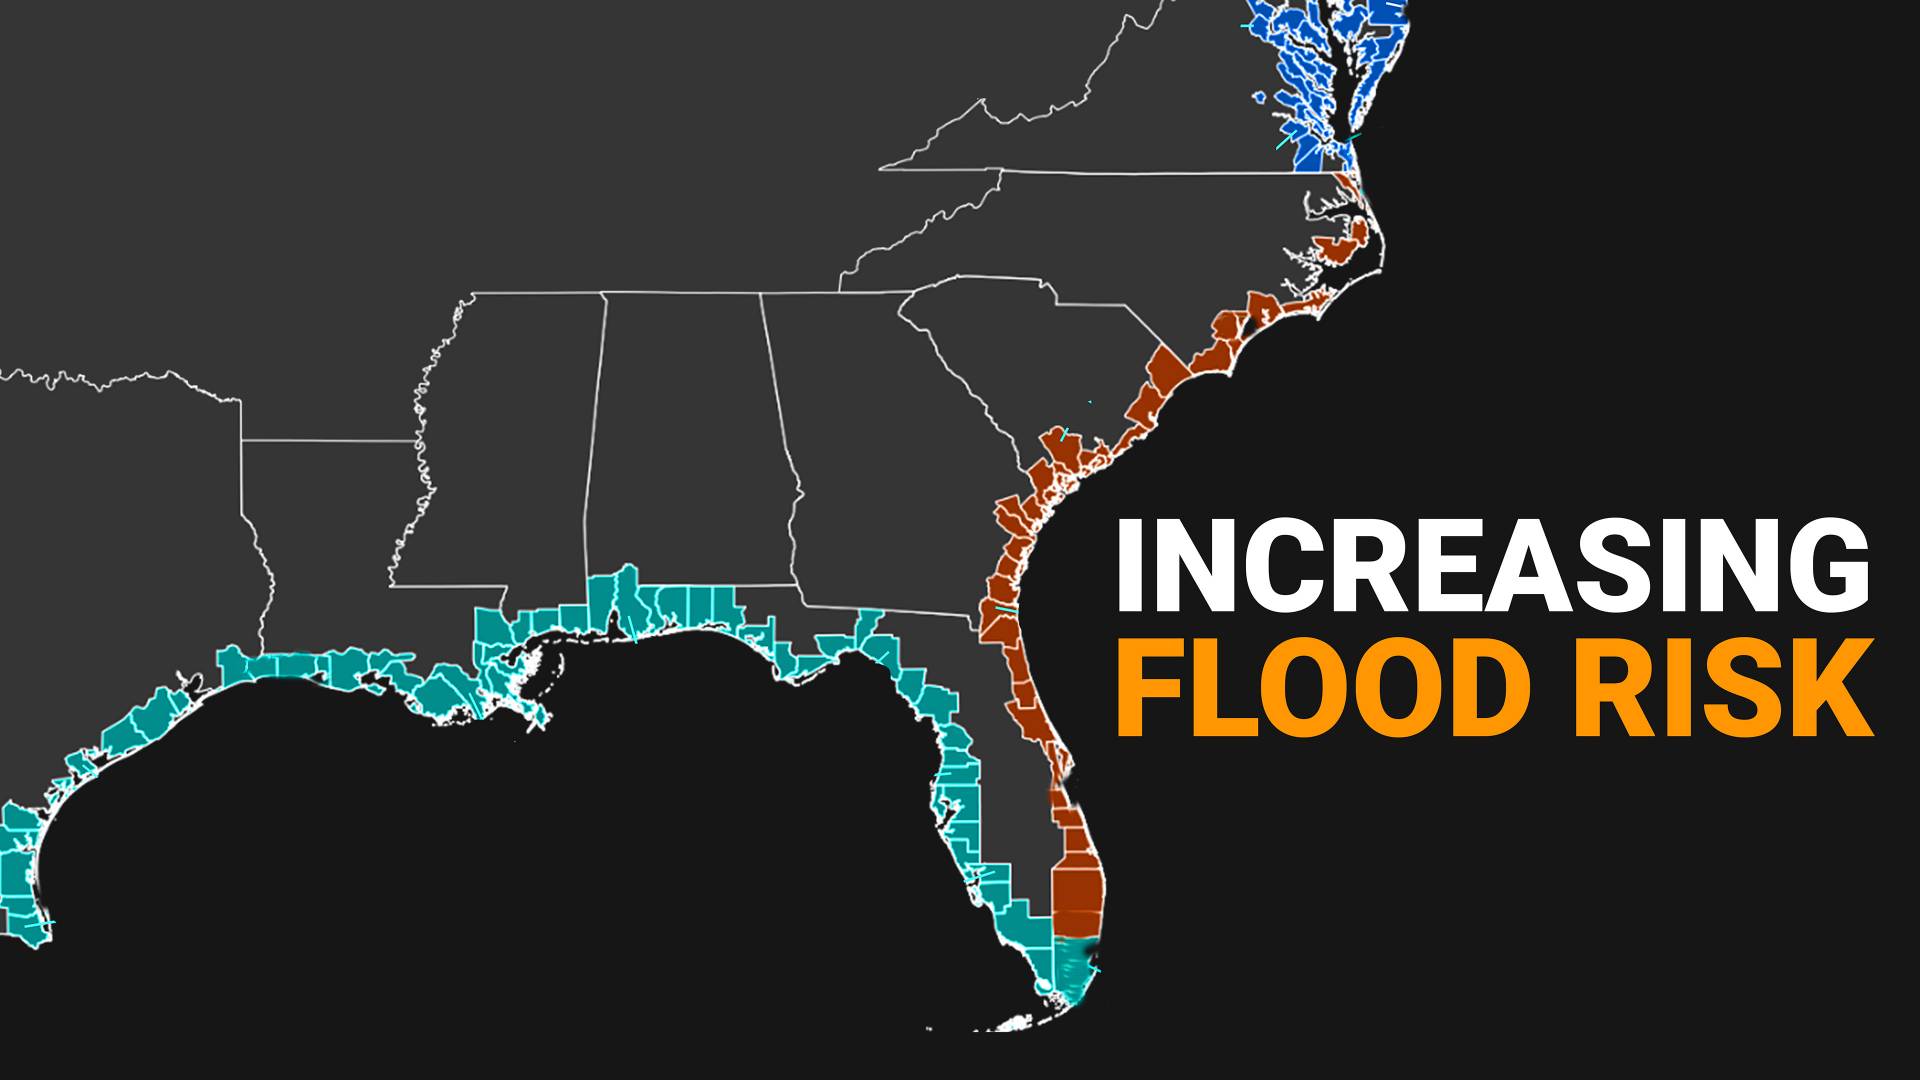 increased flood risk map with ocean-facing counties highlighted